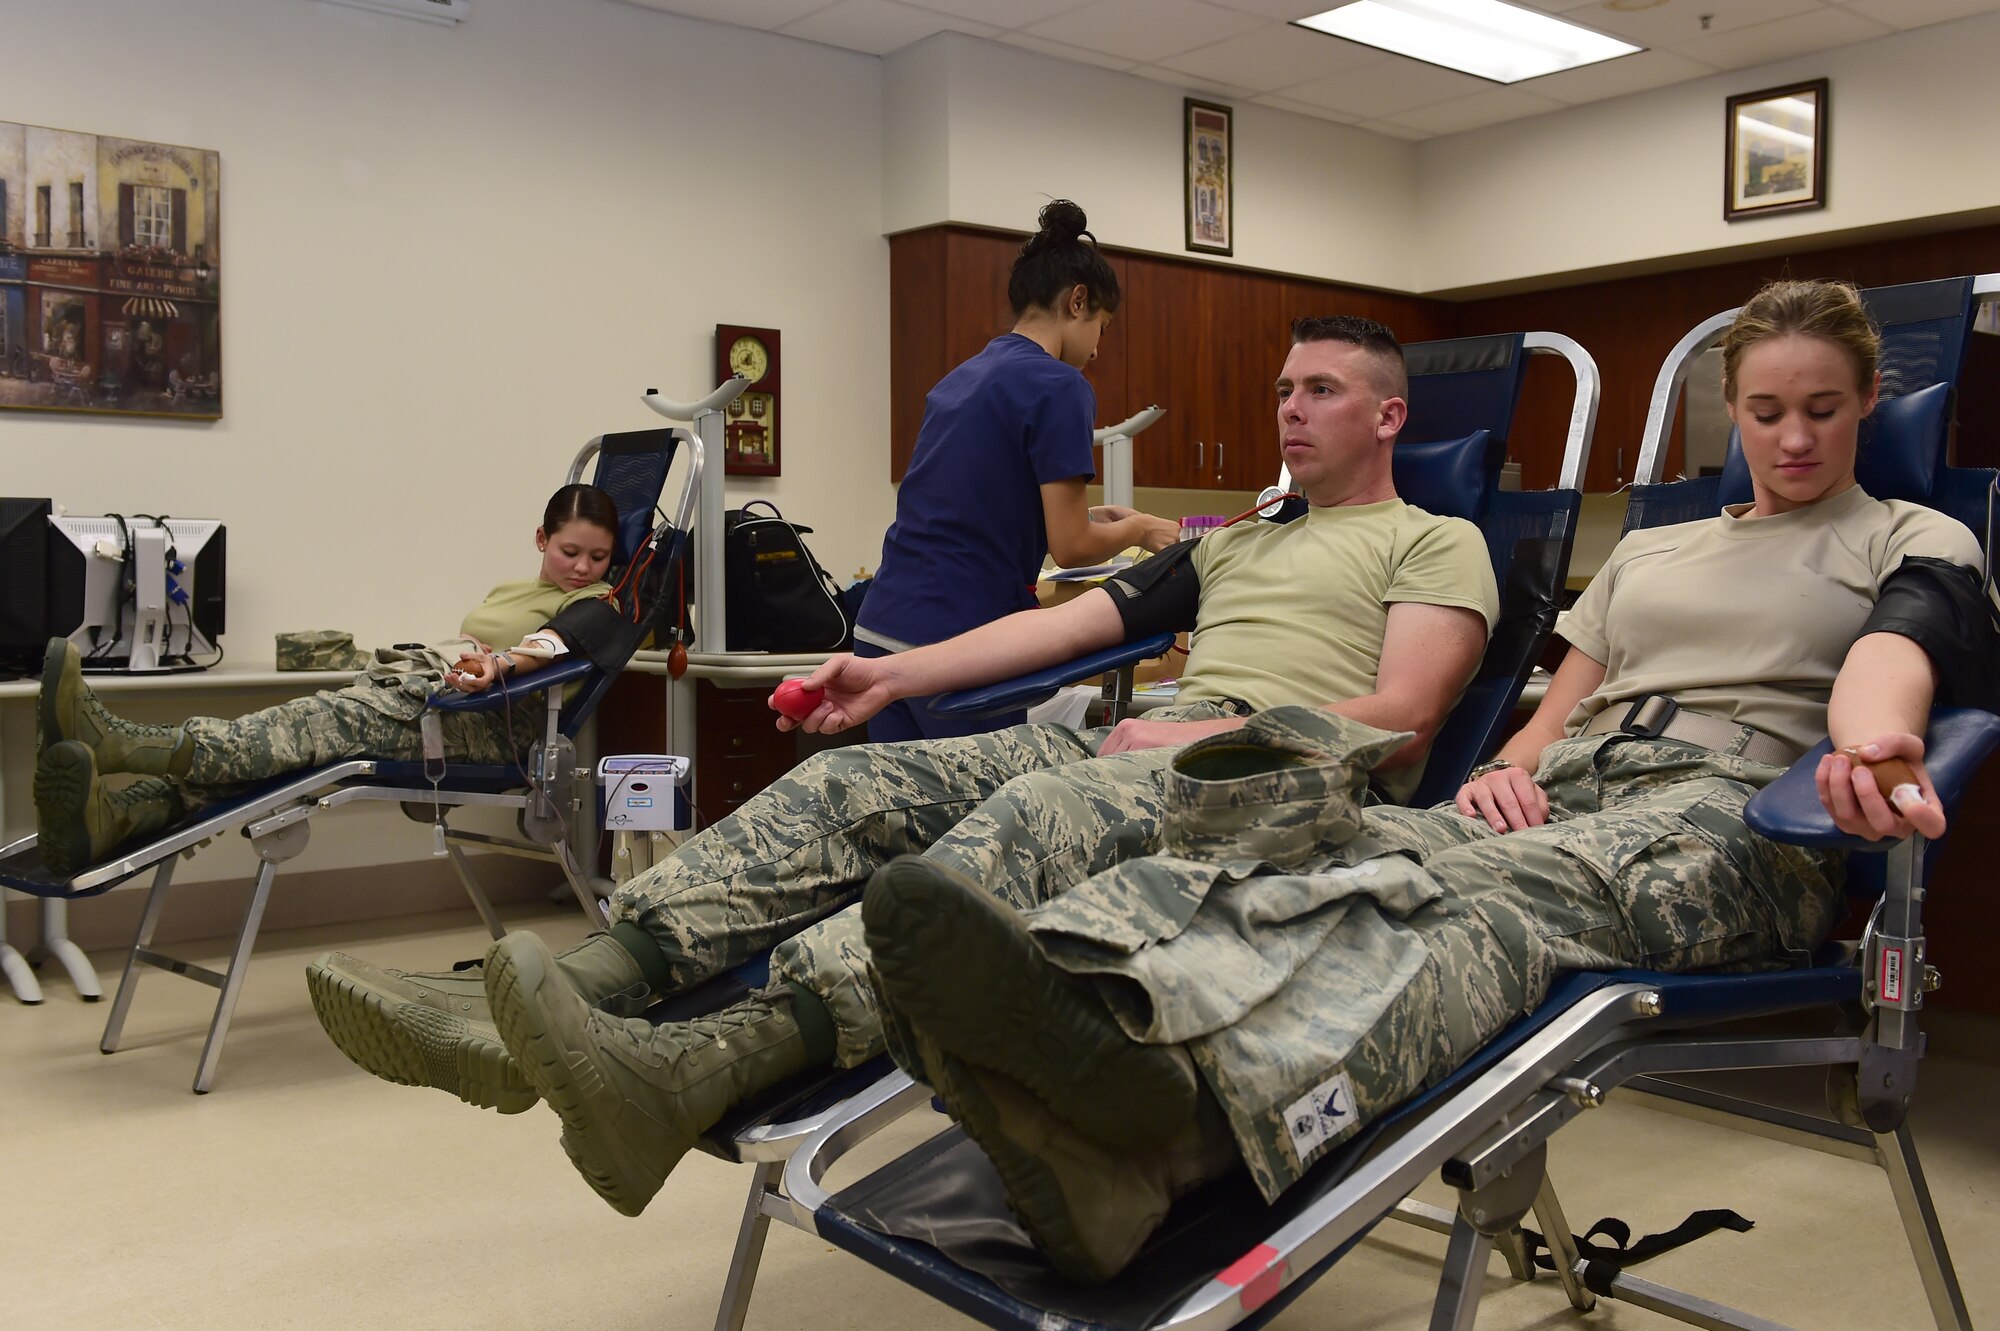 Team Buckley members donate blood during a blood drive hosted by Bonfils Blood Center Sept. 2, 2015, on Buckley Air Force Base, Colo. The blood drive is hosted to raise awareness and donations for those in need. (U.S. Air Force photo by Airman 1st Class Luke W. Nowakowski/Released)